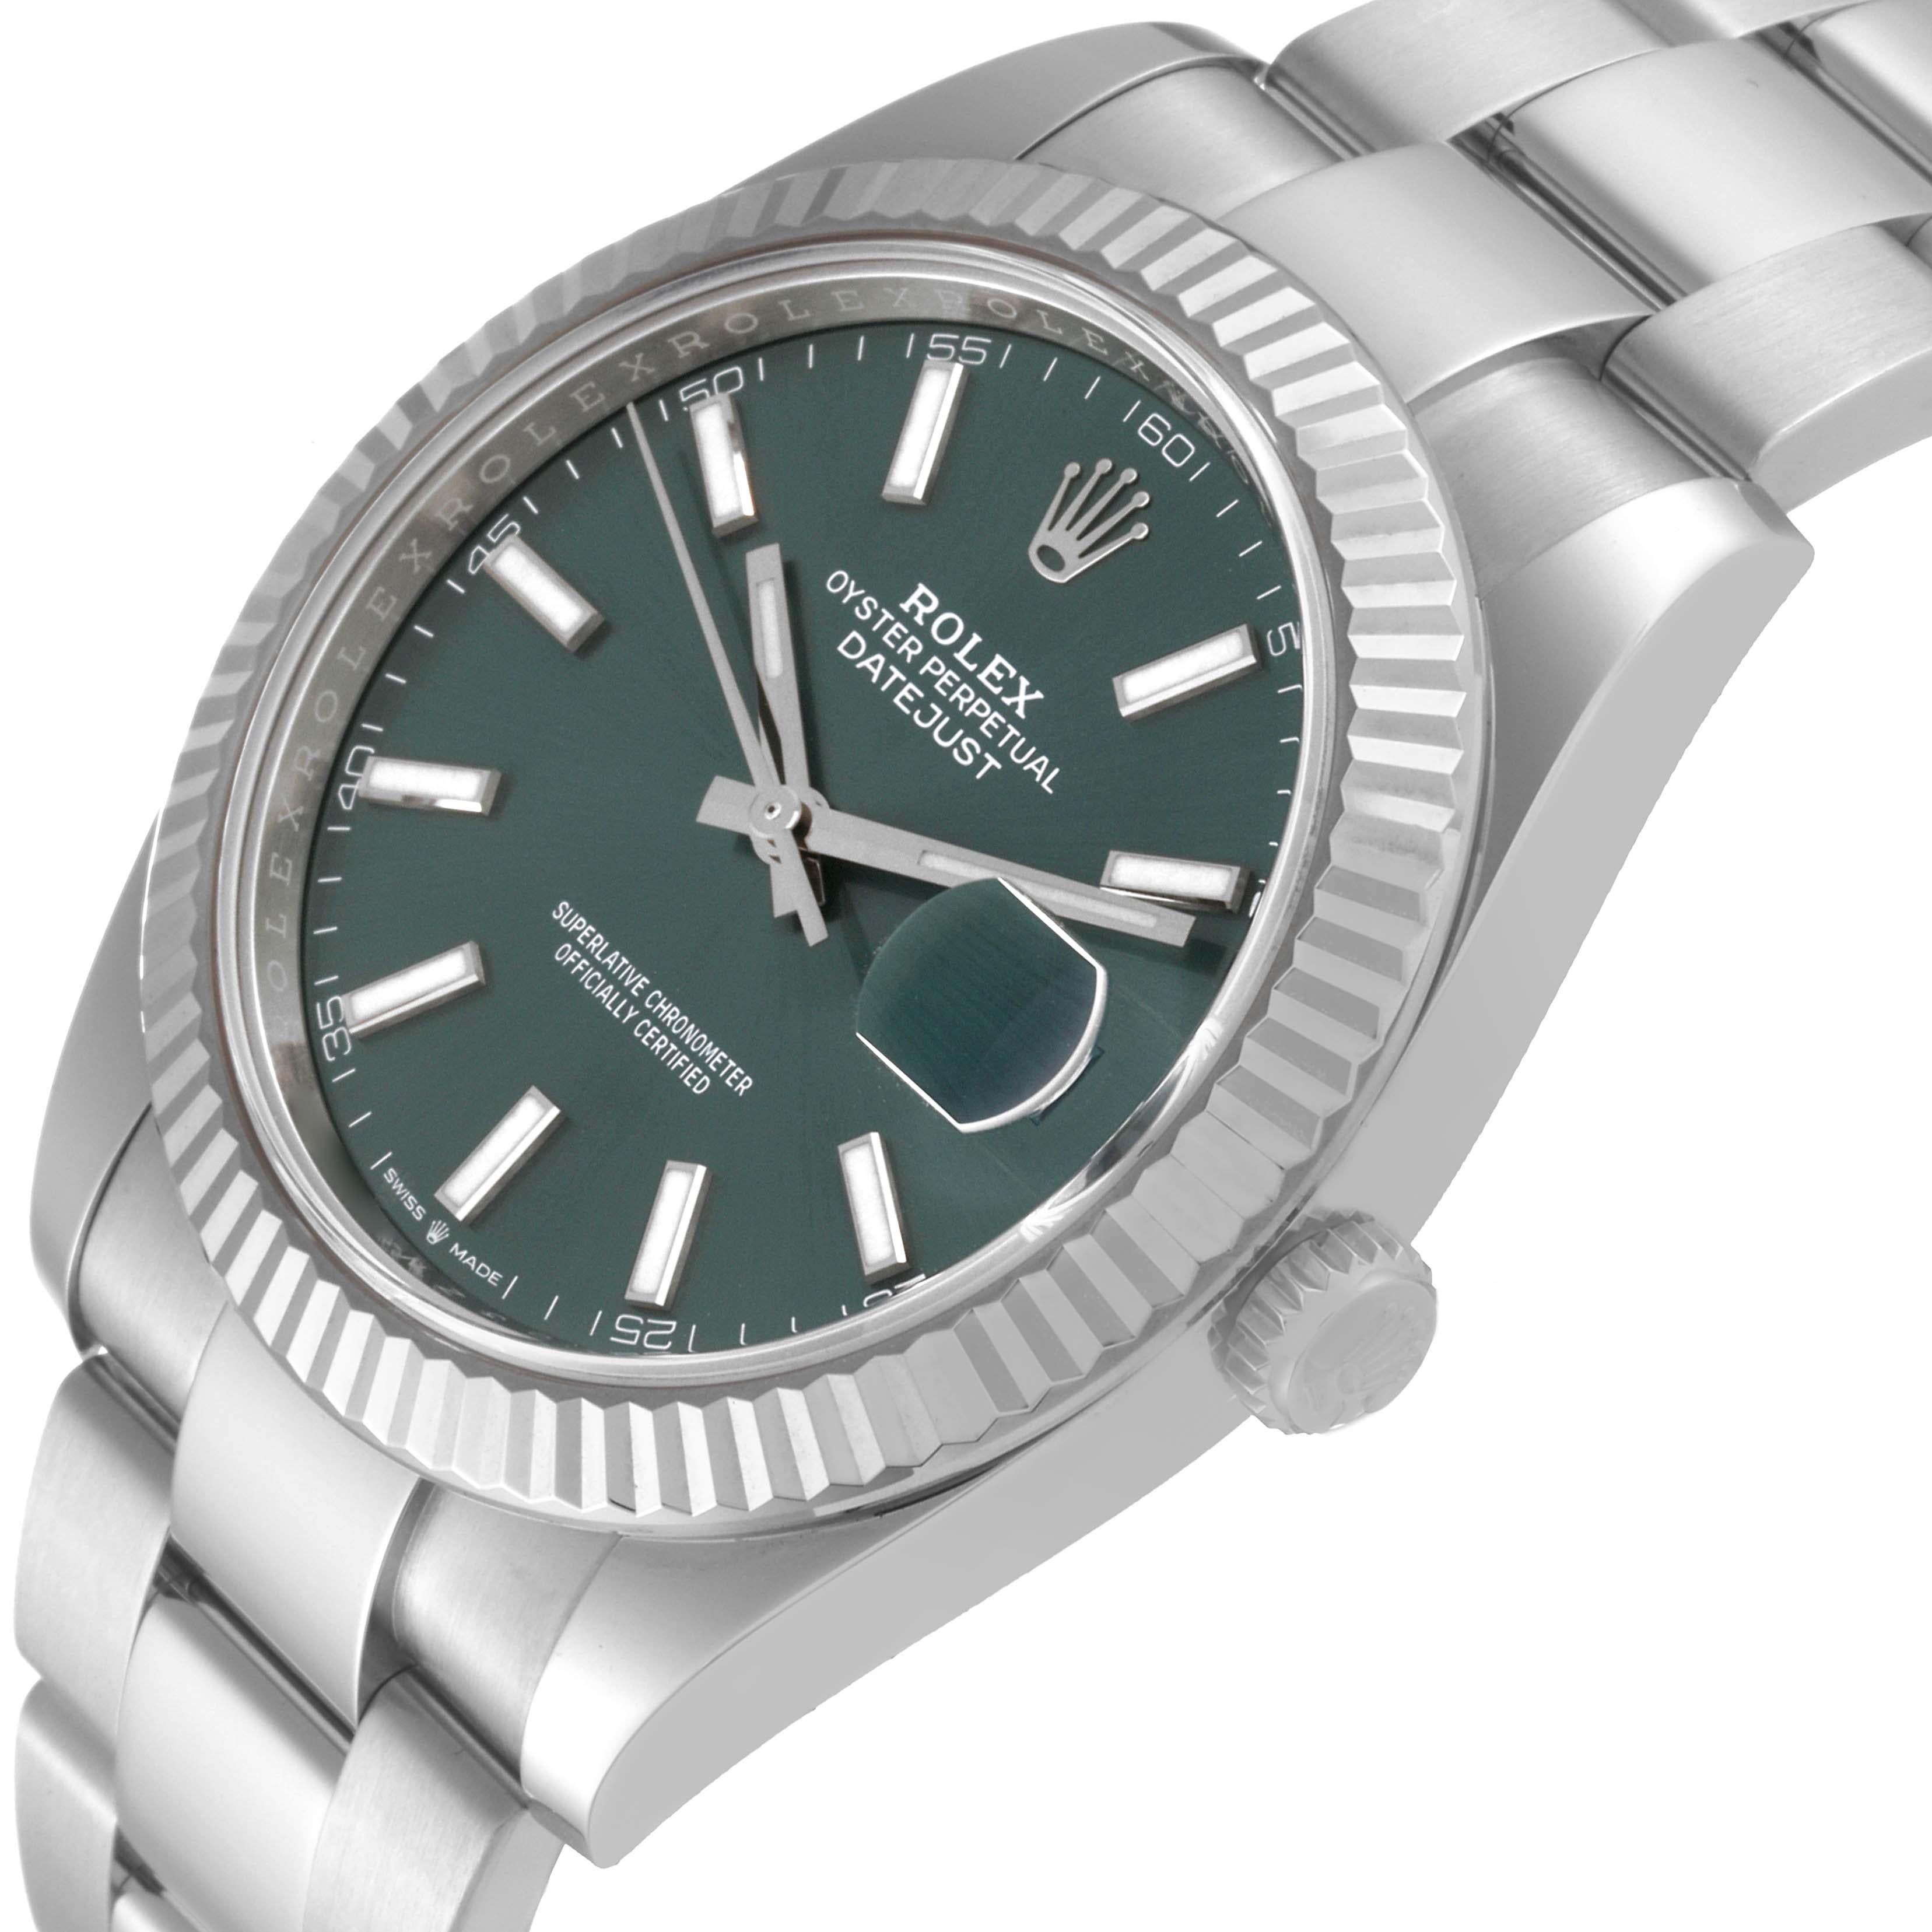 Rolex Datejust 41 Steel White Gold Mint Green Dial Mens Watch 126334 Box Card 4